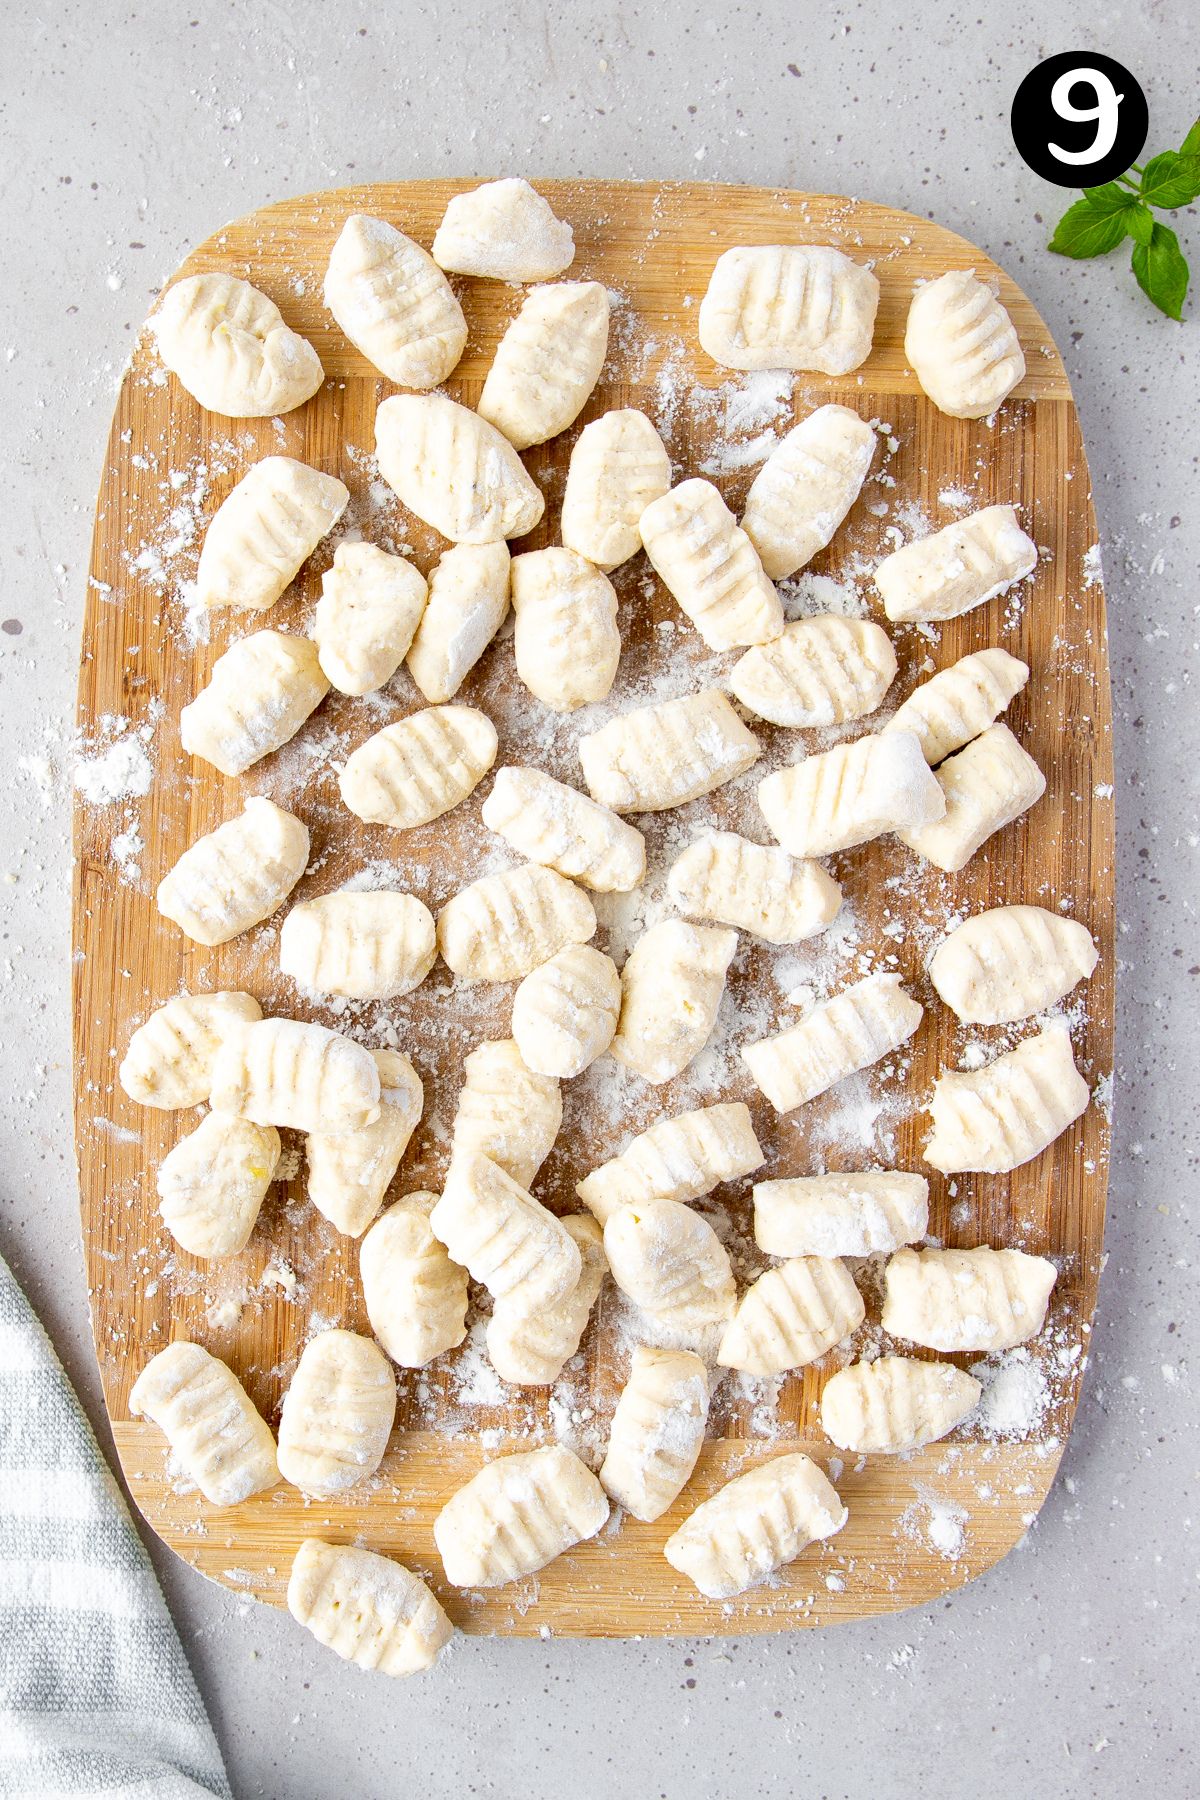 pieces of gnocchi on a lightly floured board.